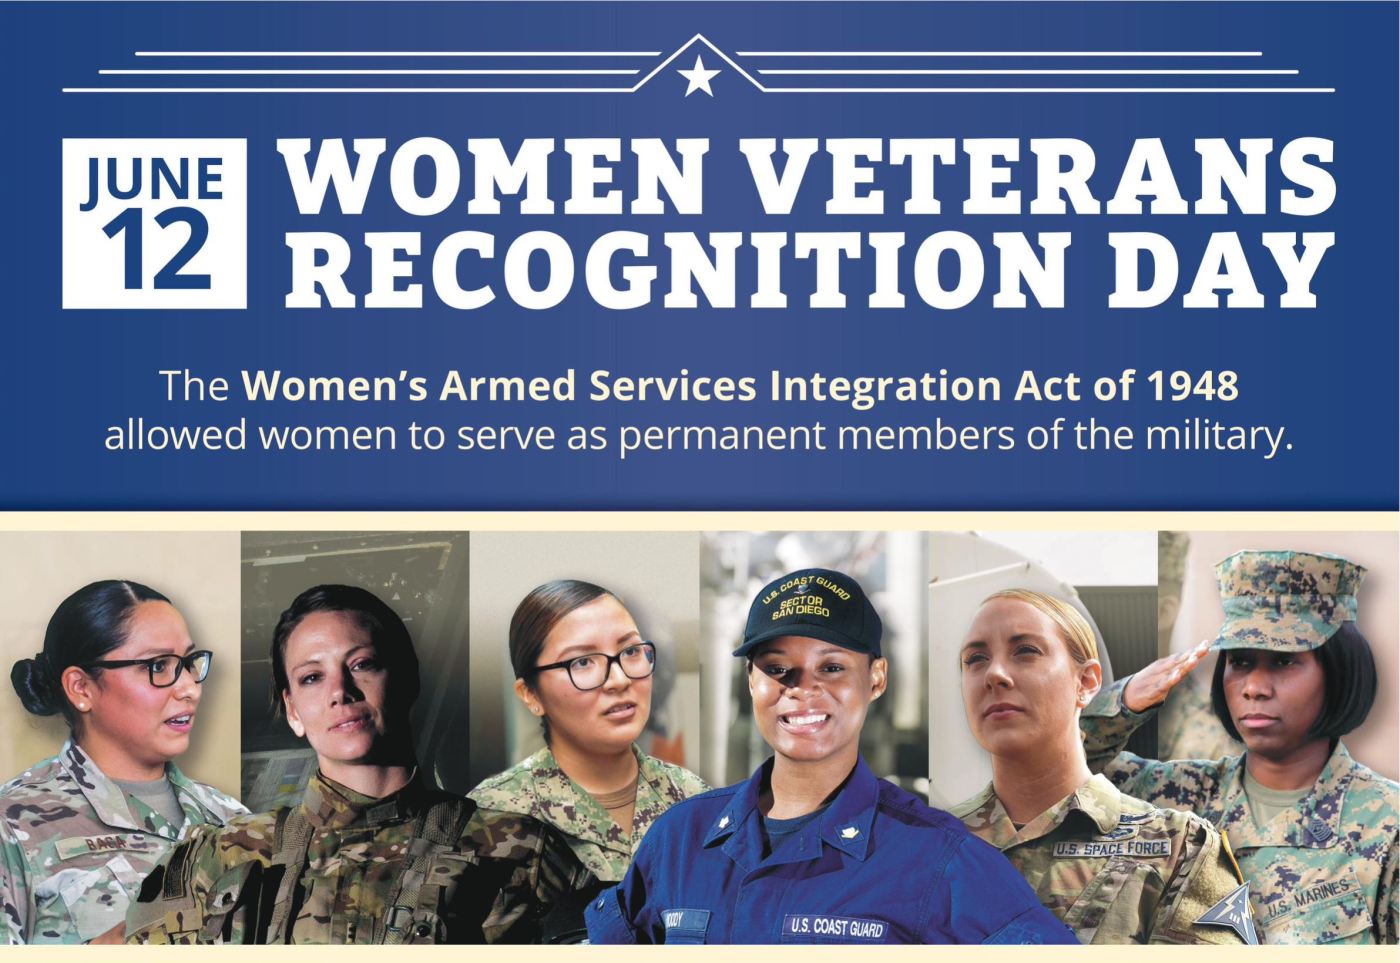 myths of Women Veterans Recognition Day